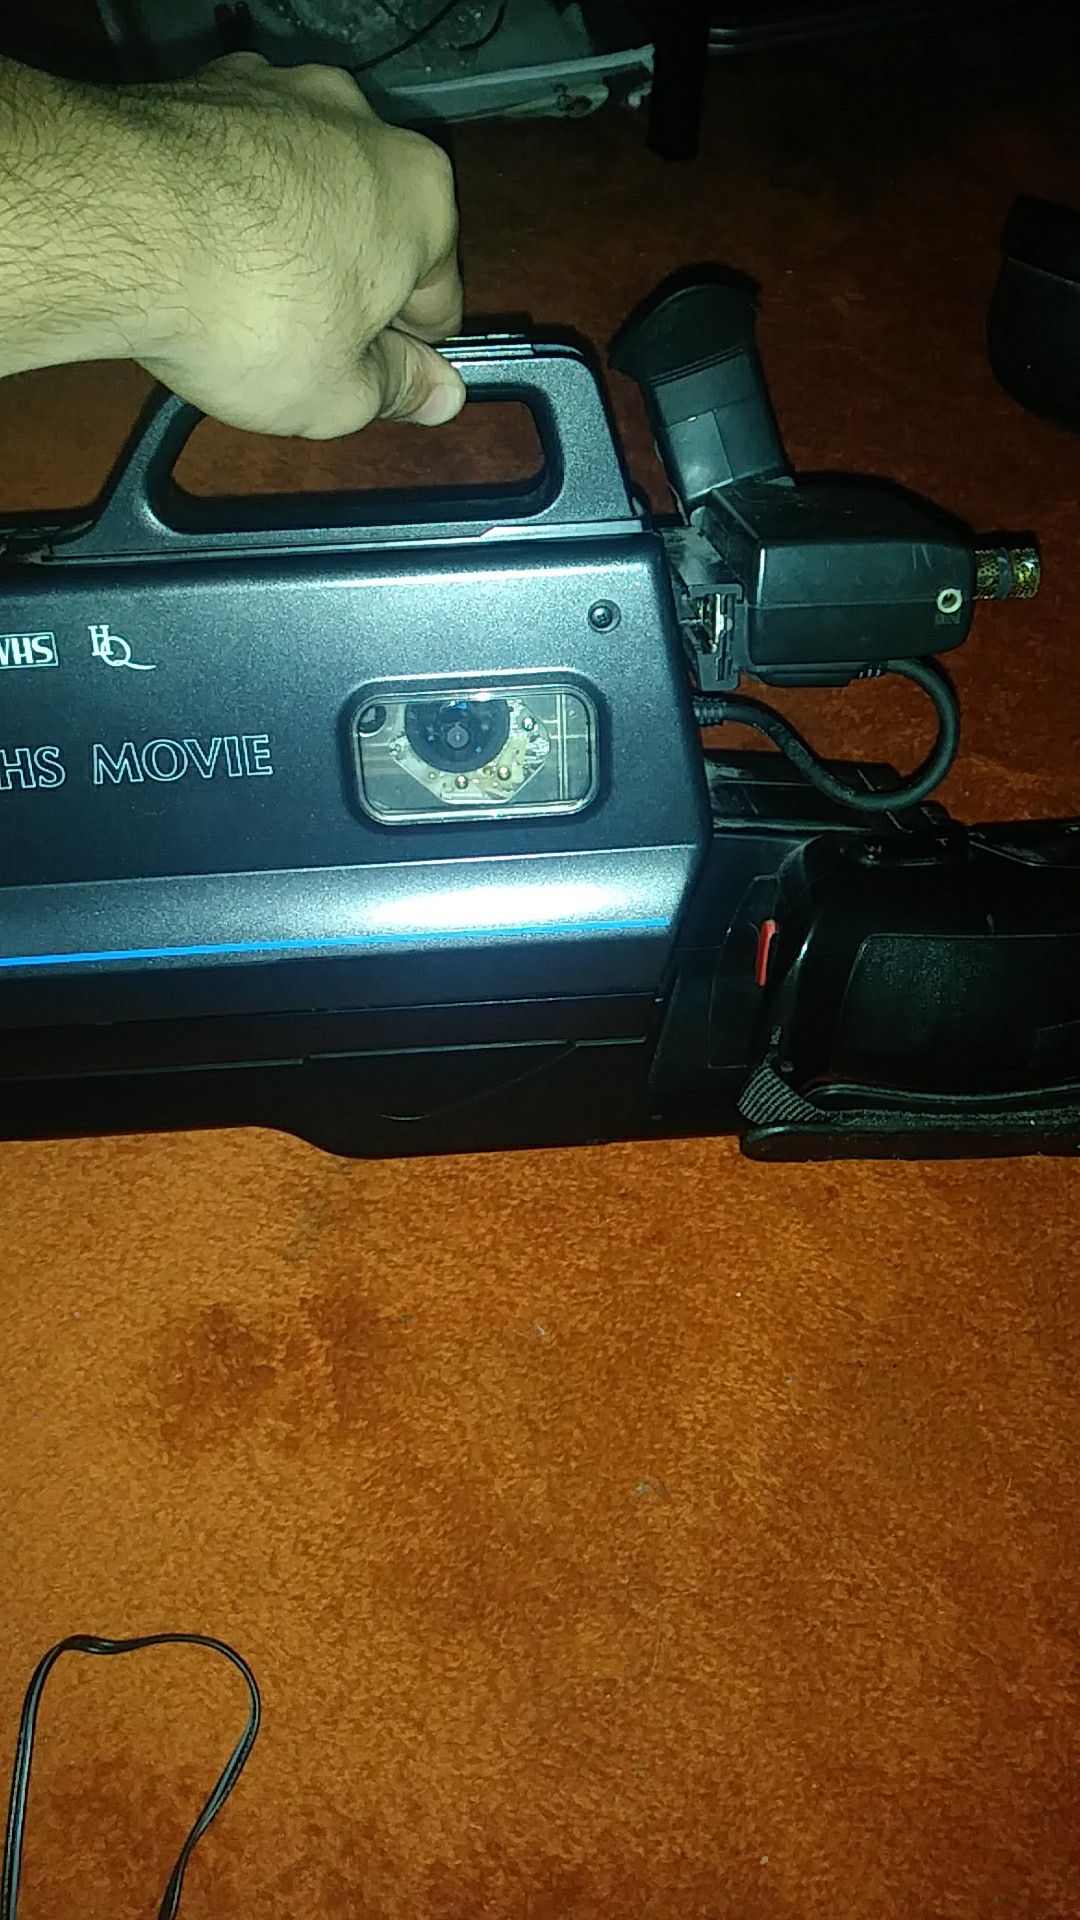 1988 sears camcorder